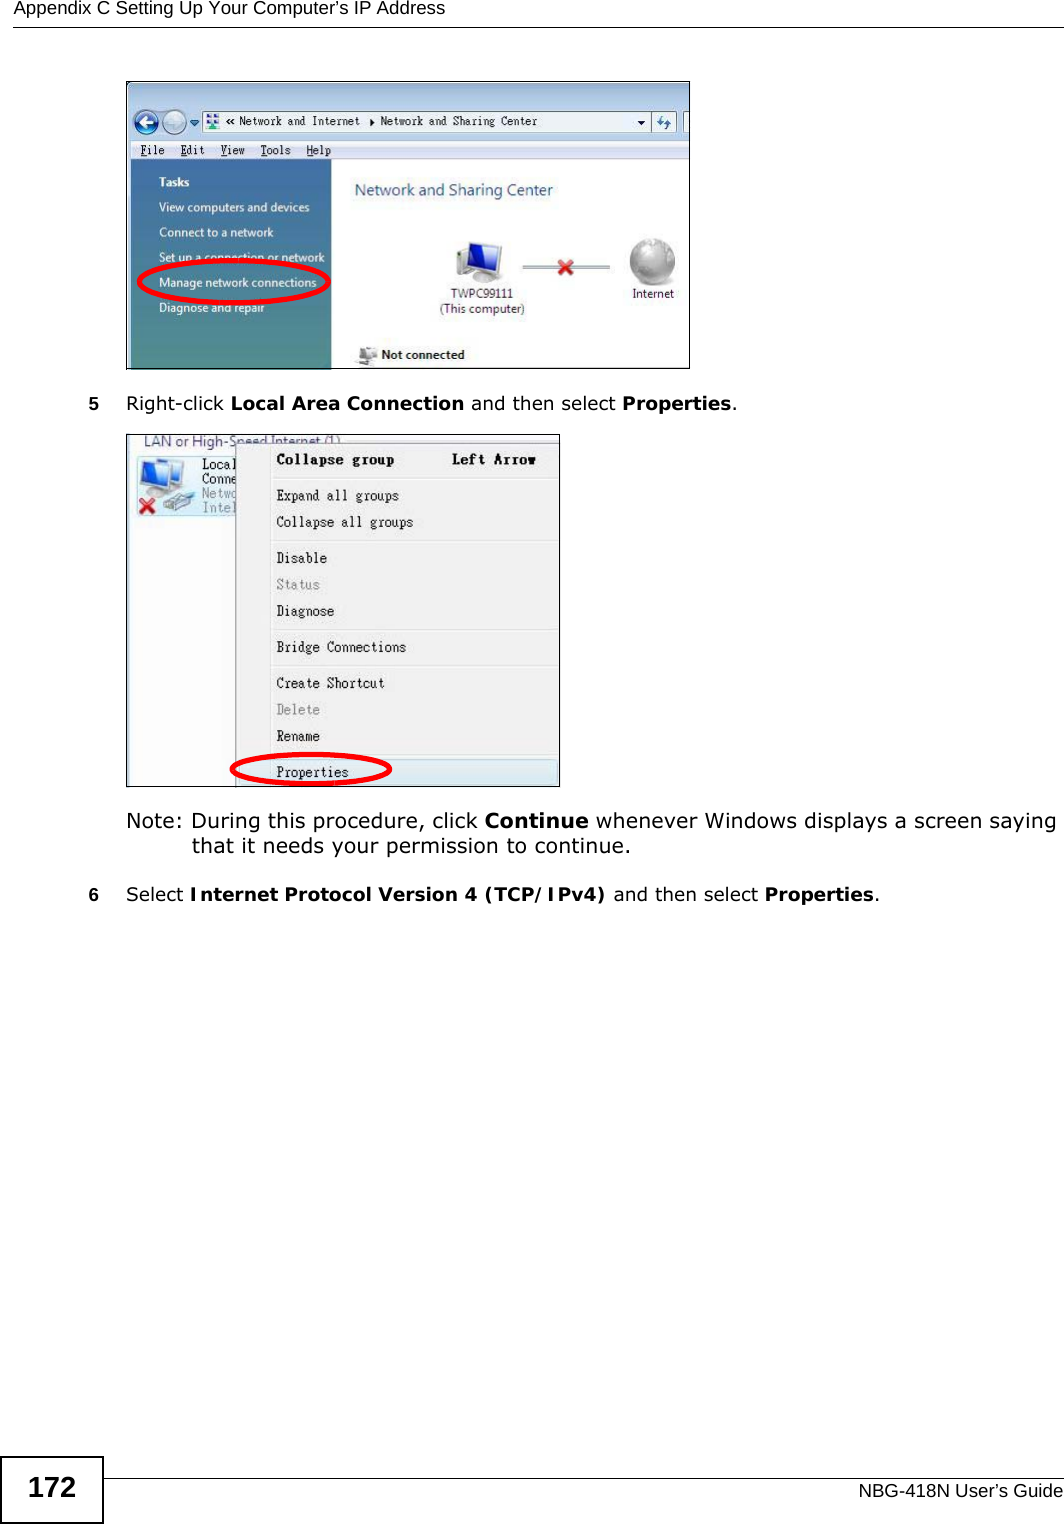 Appendix C Setting Up Your Computer’s IP AddressNBG-418N User’s Guide1725Right-click Local Area Connection and then select Properties.Note: During this procedure, click Continue whenever Windows displays a screen saying that it needs your permission to continue.6Select Internet Protocol Version 4 (TCP/IPv4) and then select Properties.